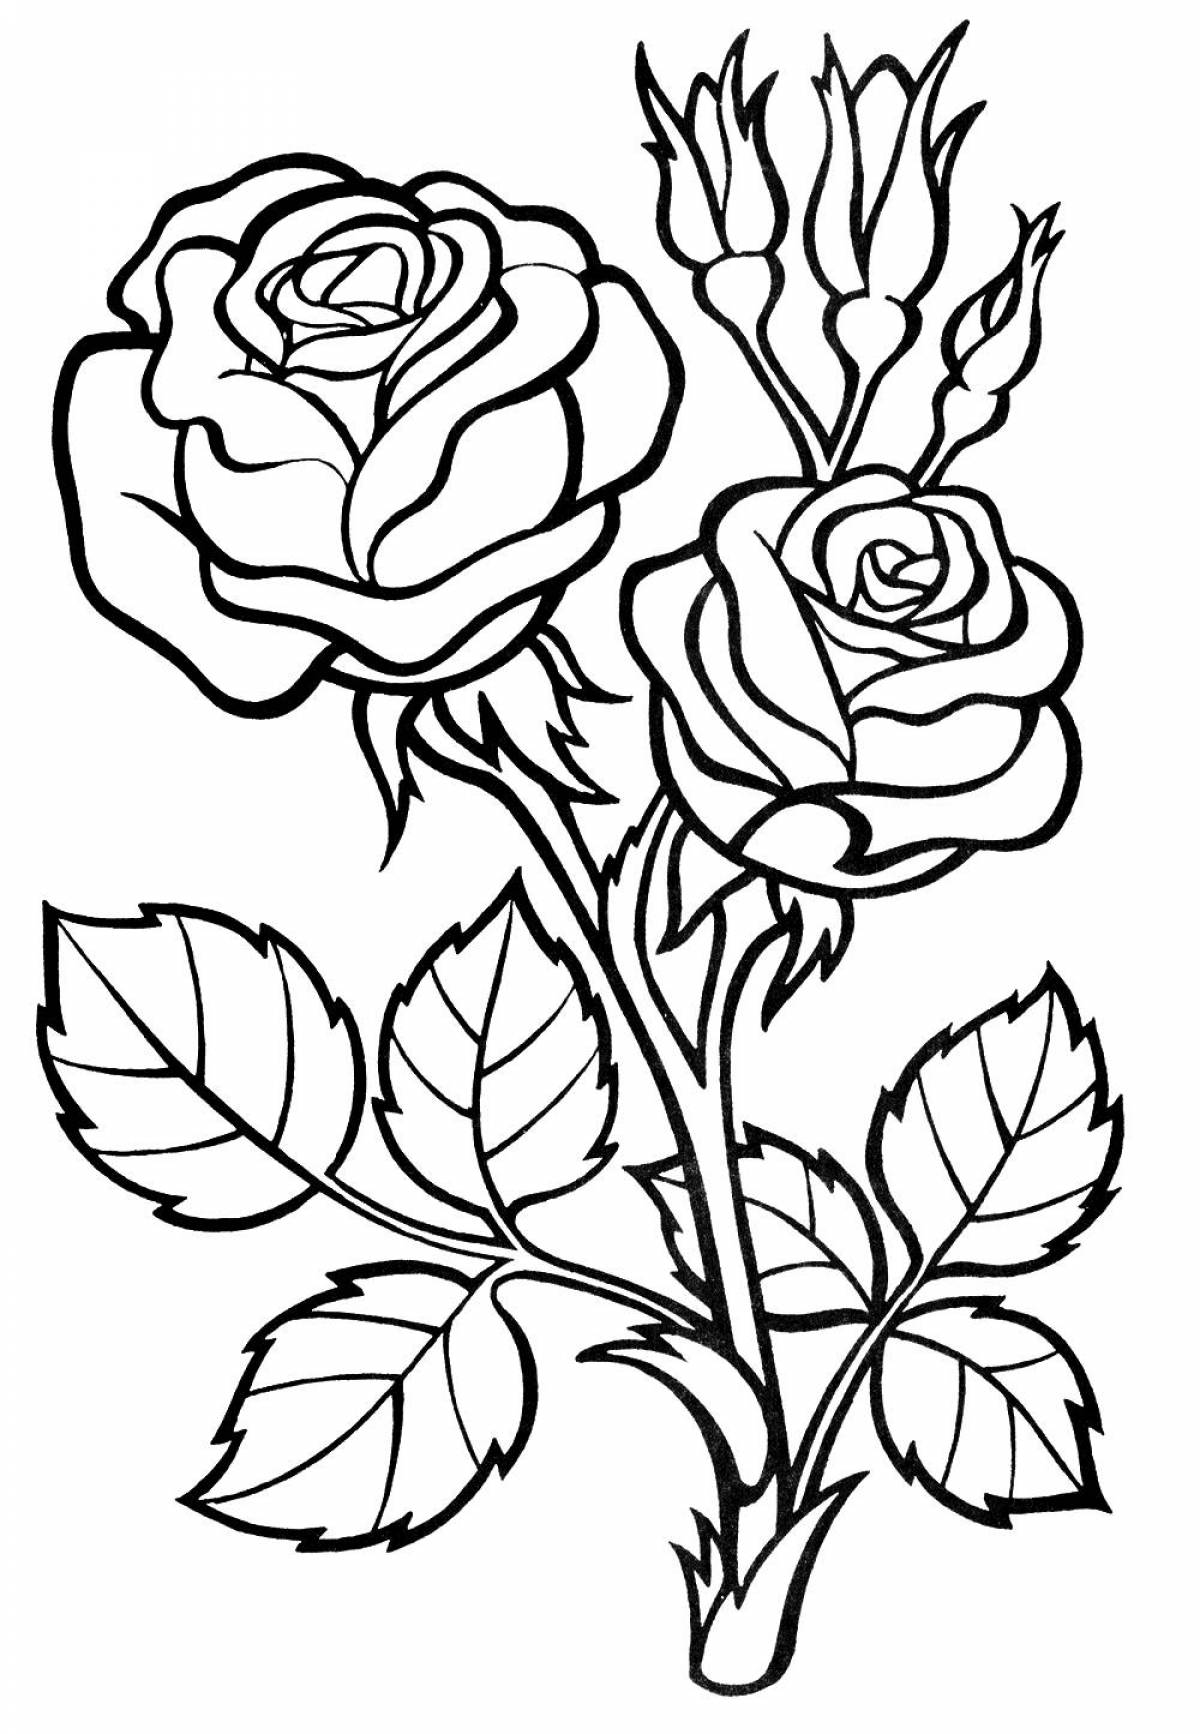 Delicate rose coloring